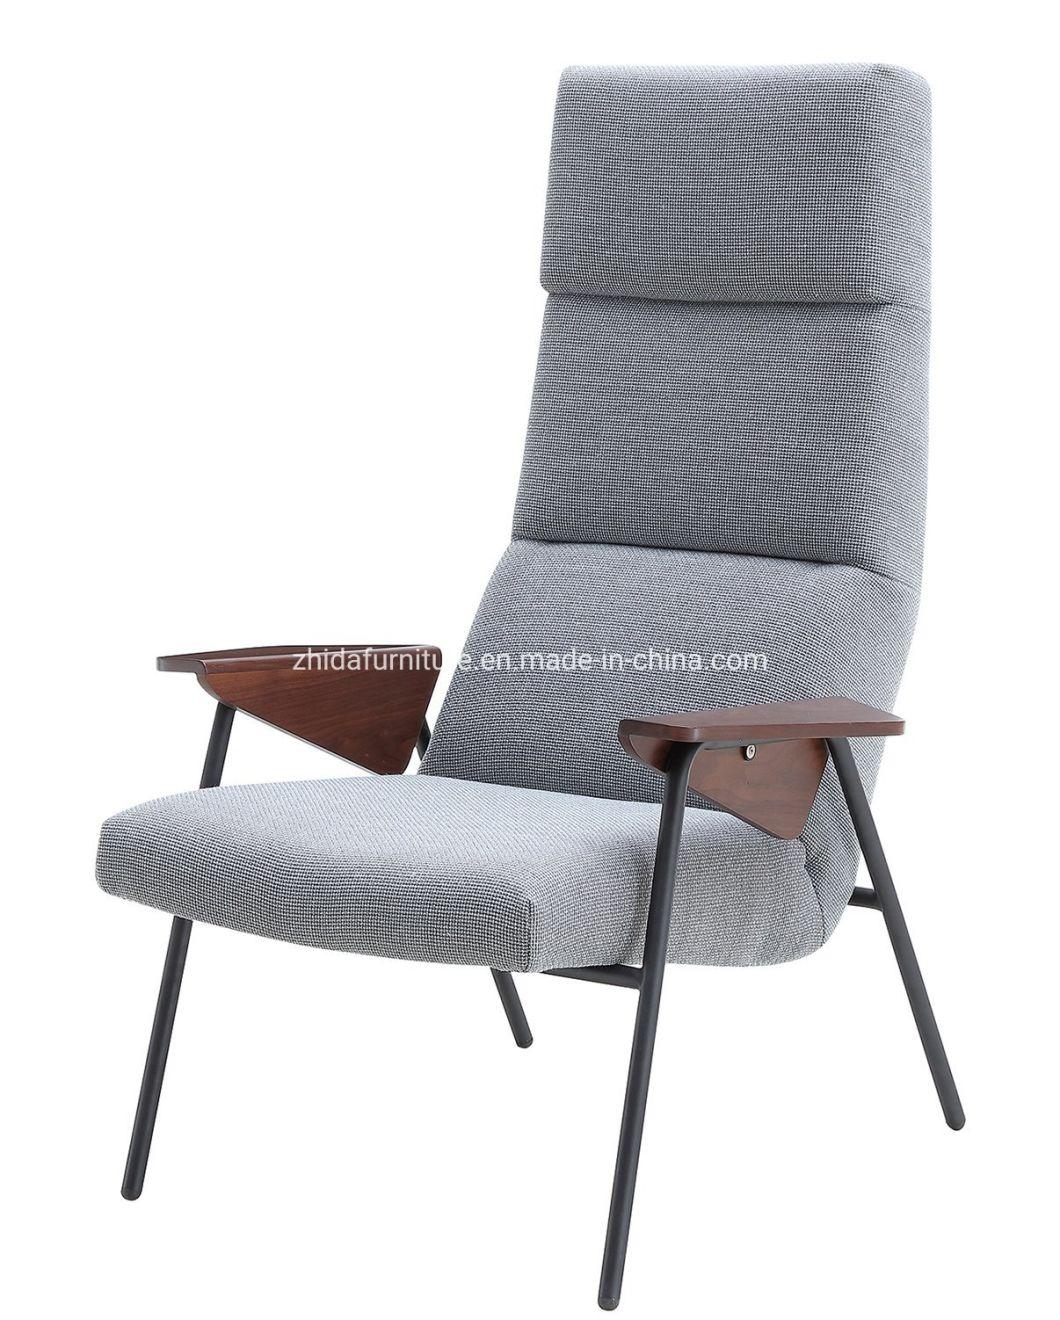 High Back Modern Living Room Furniture Leisure Chair with Wooden Arm